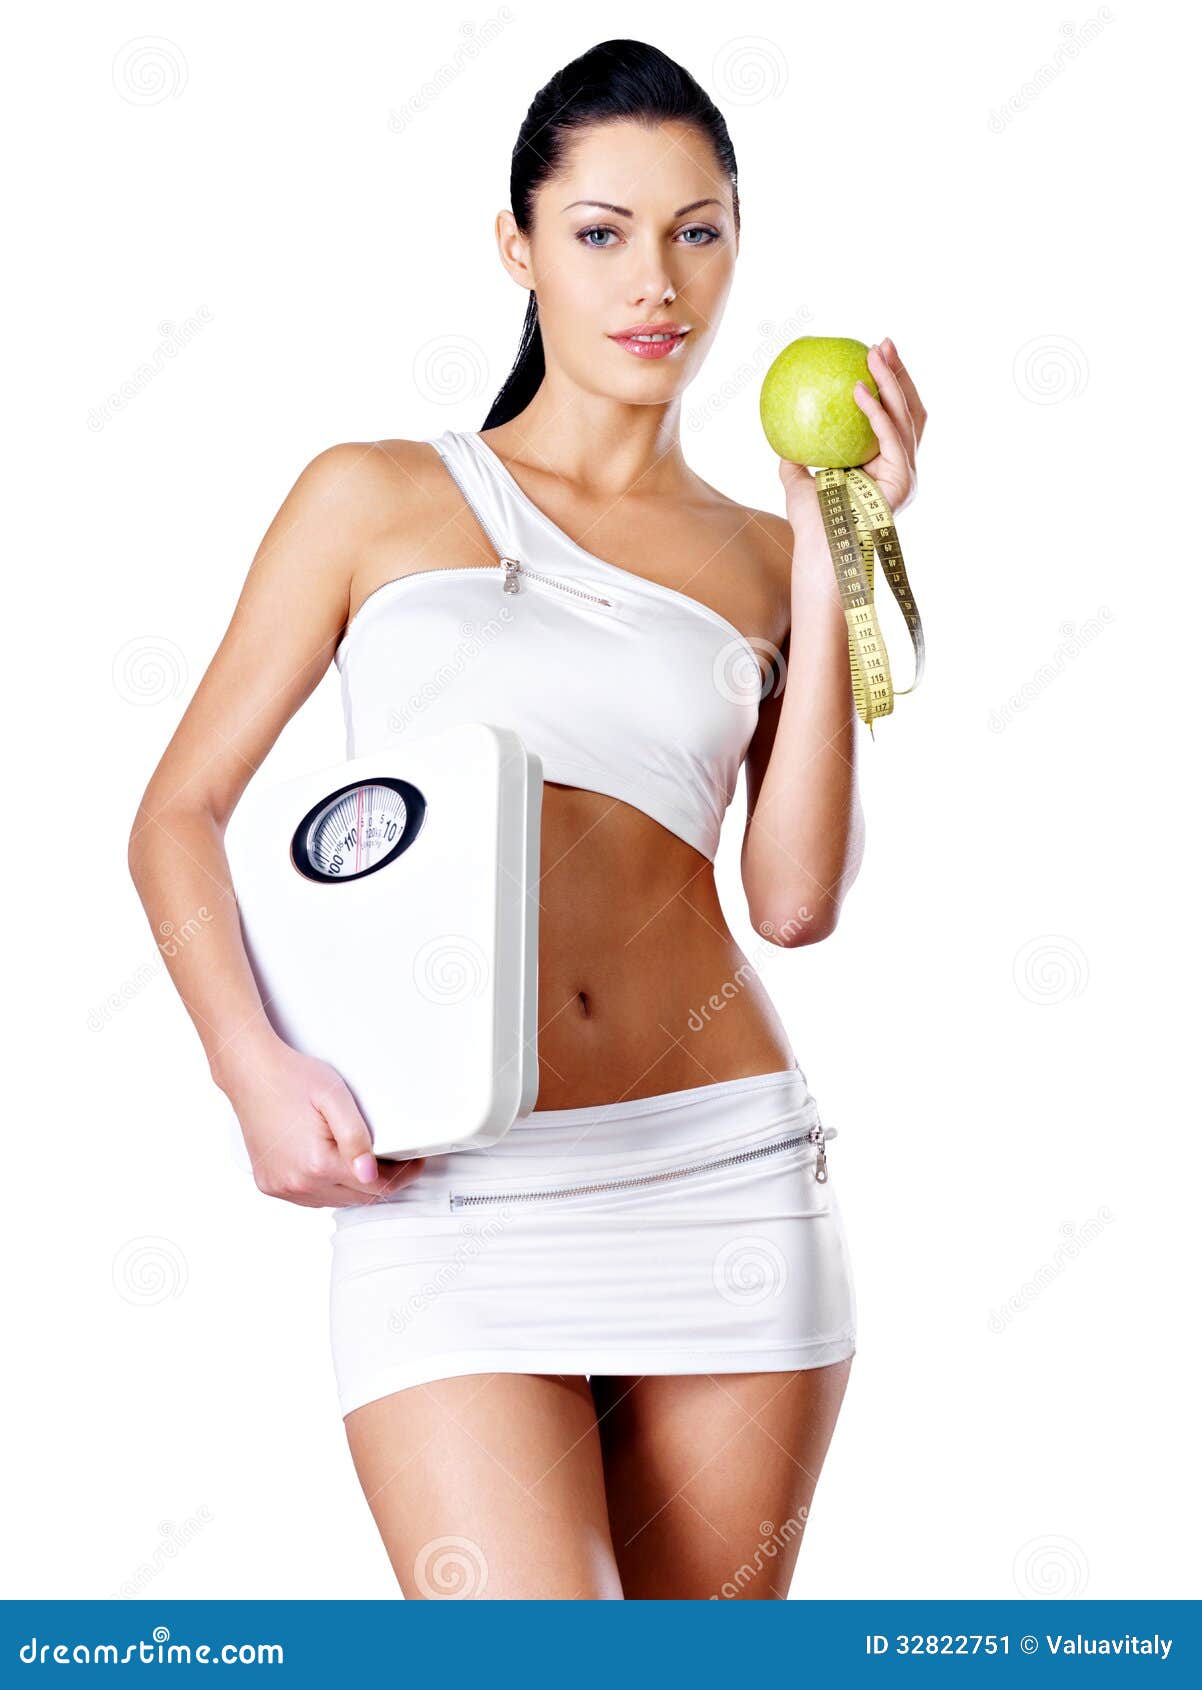 the healthy woman